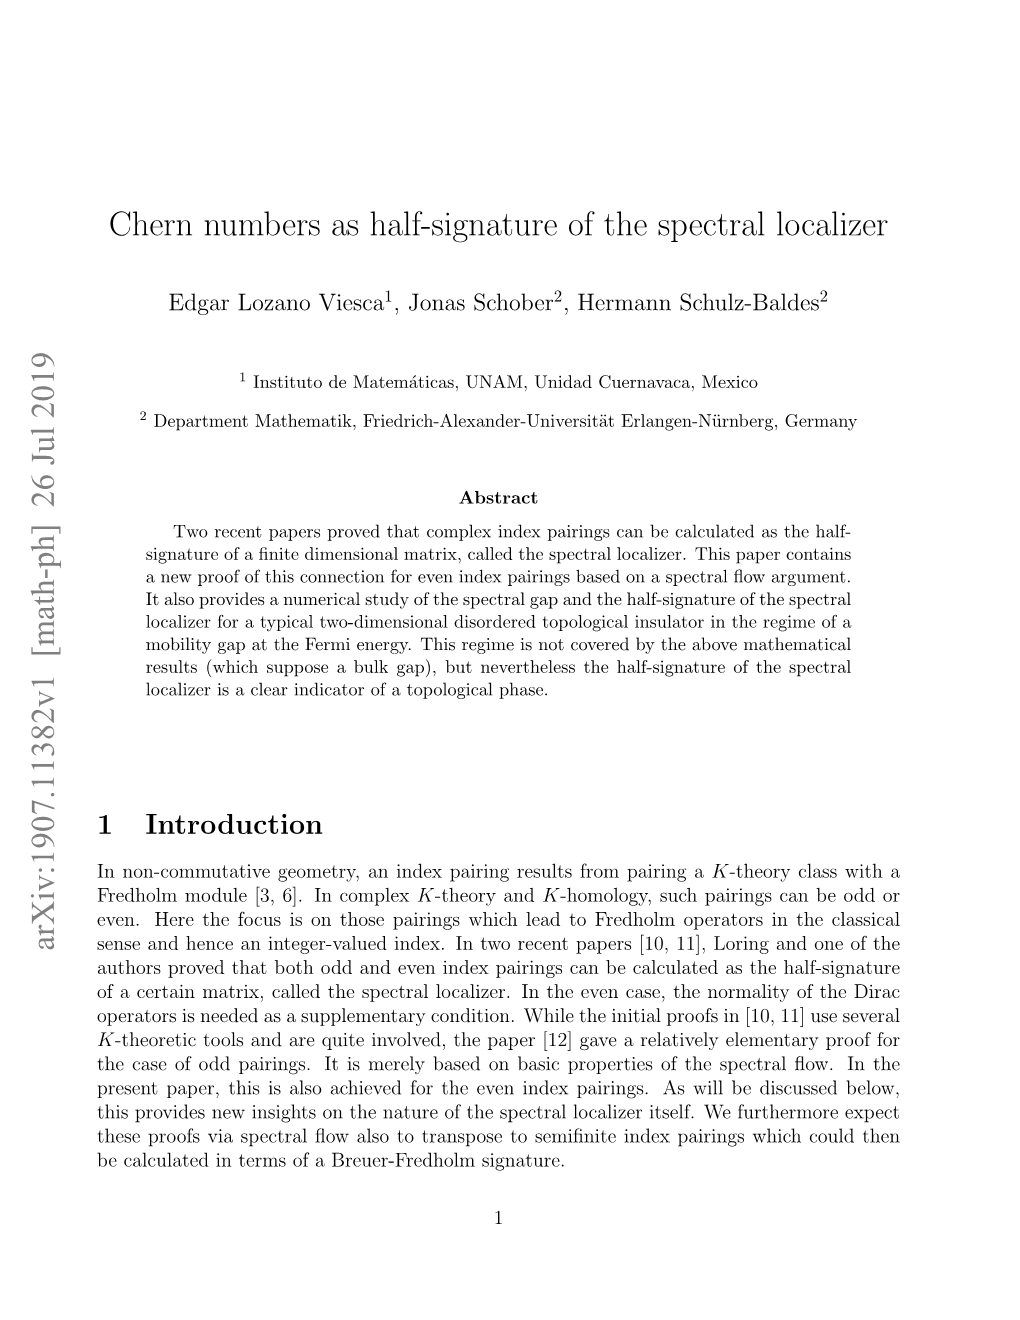 Chern Numbers As Half-Signature of the Spectral Localizer